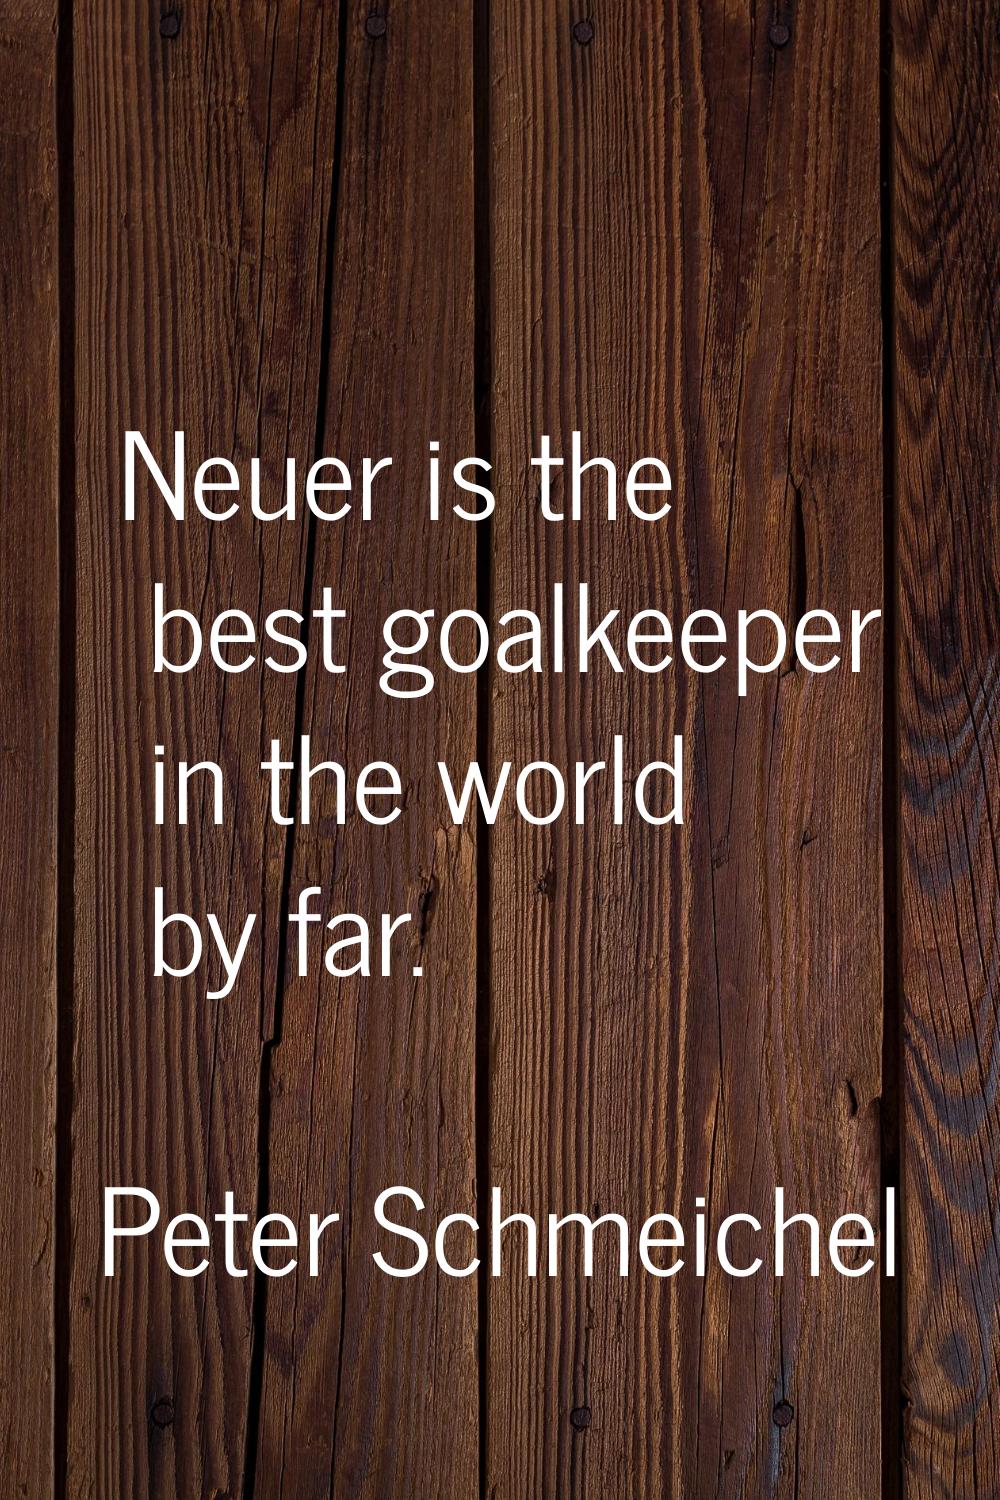 Neuer is the best goalkeeper in the world by far.